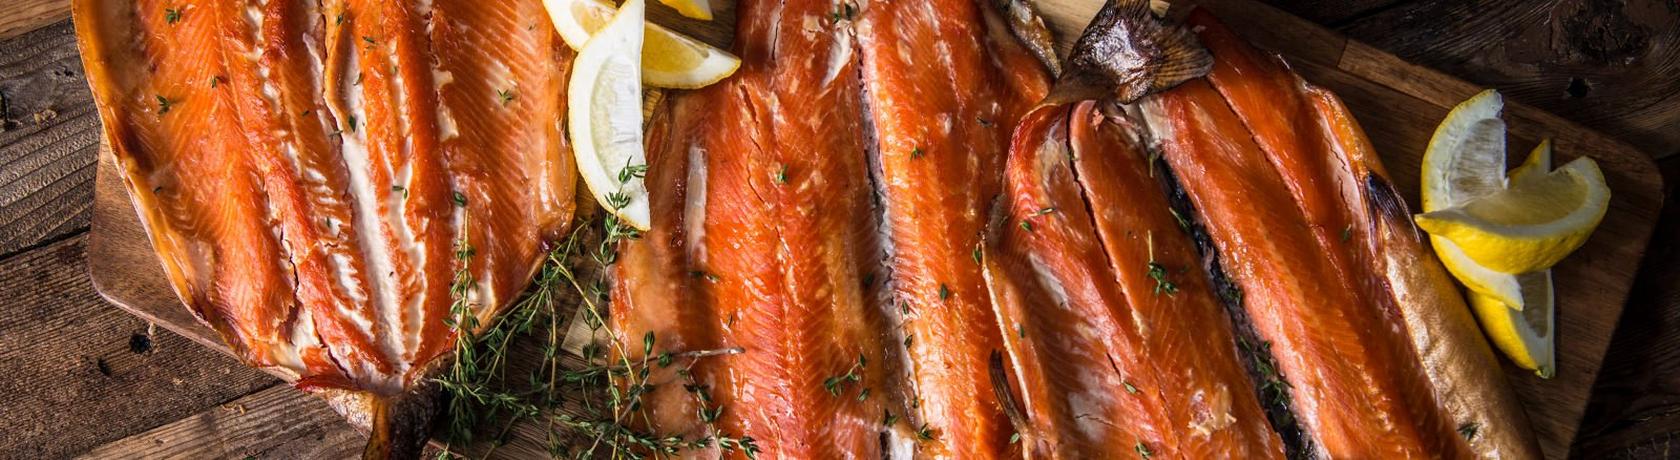 image of Smoked Trout